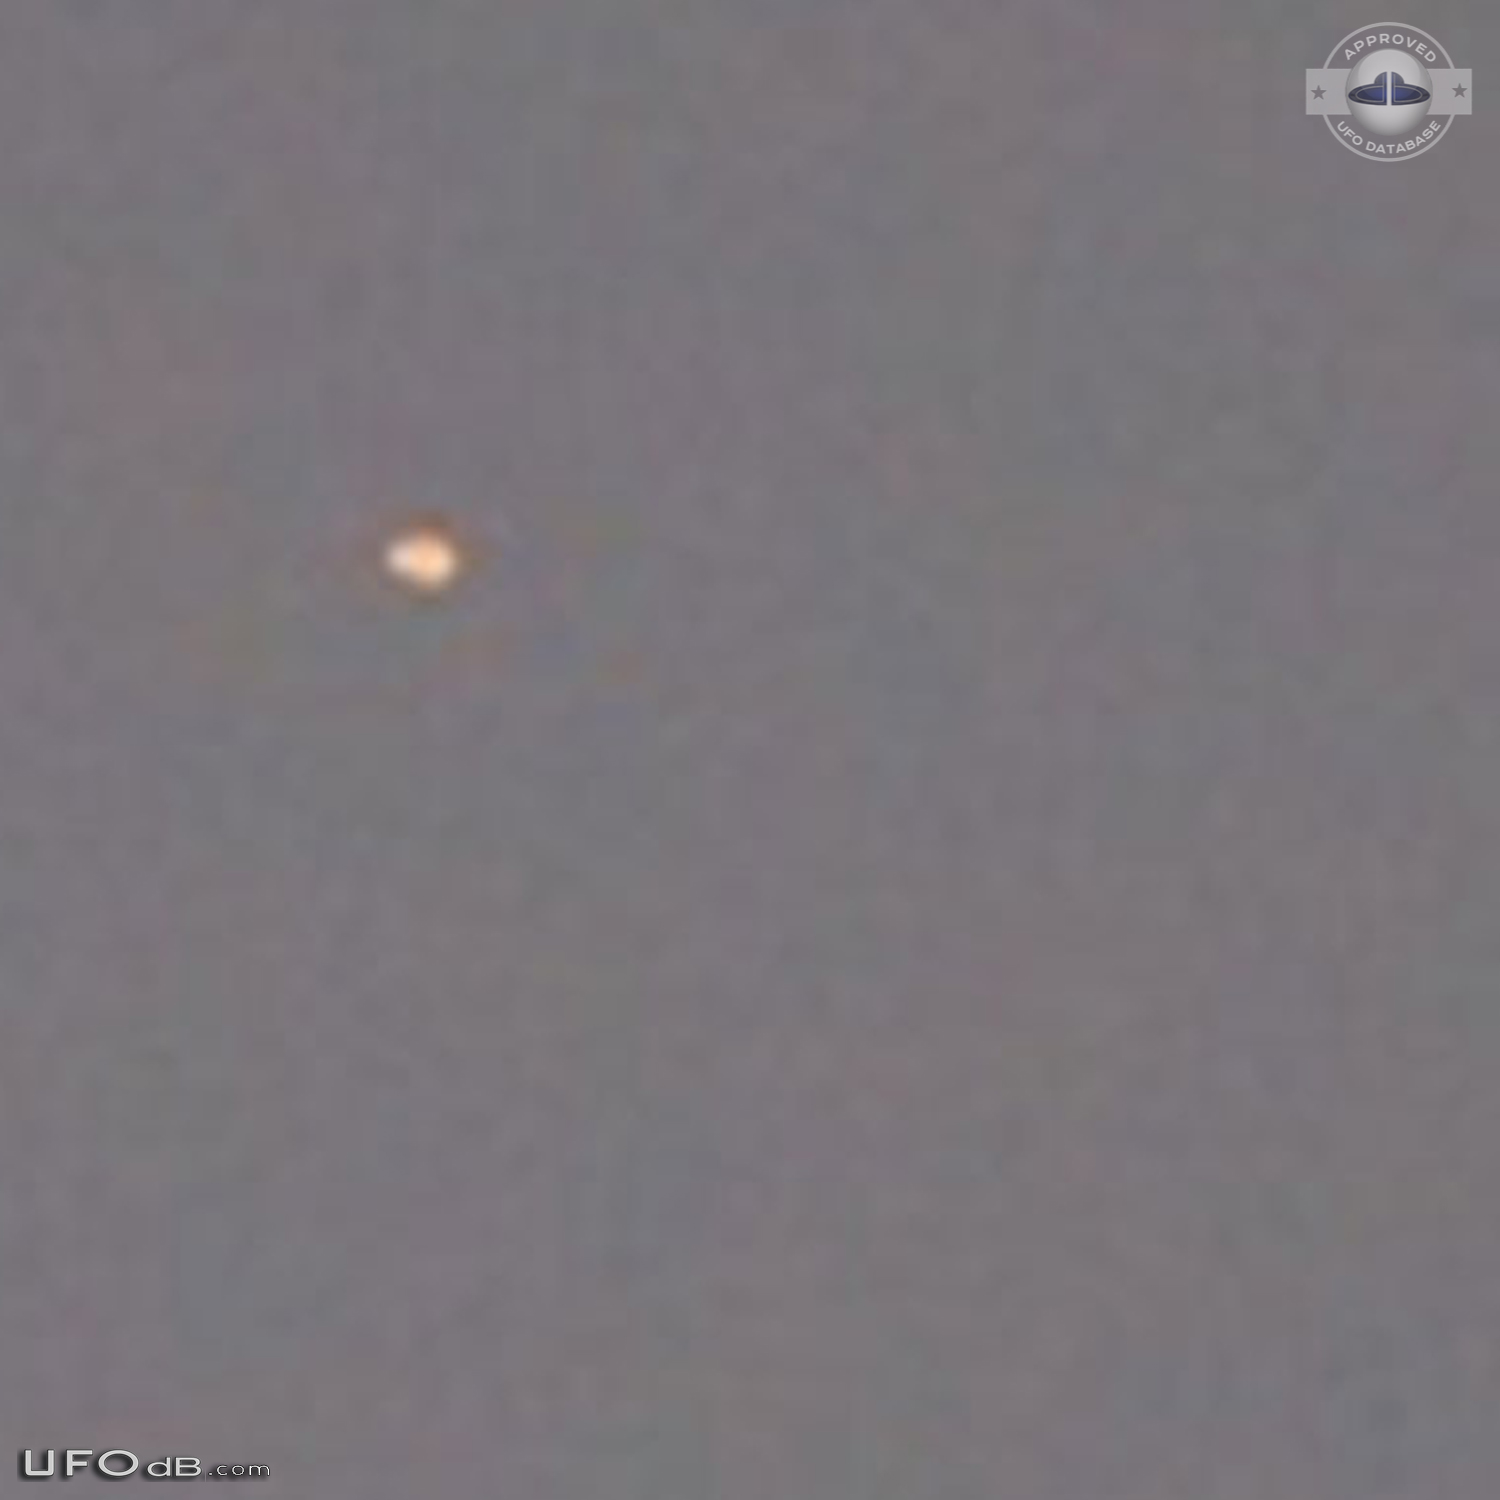 Day light large silver UFO in Fremantle Western Australia January 2015 UFO Picture #655-3